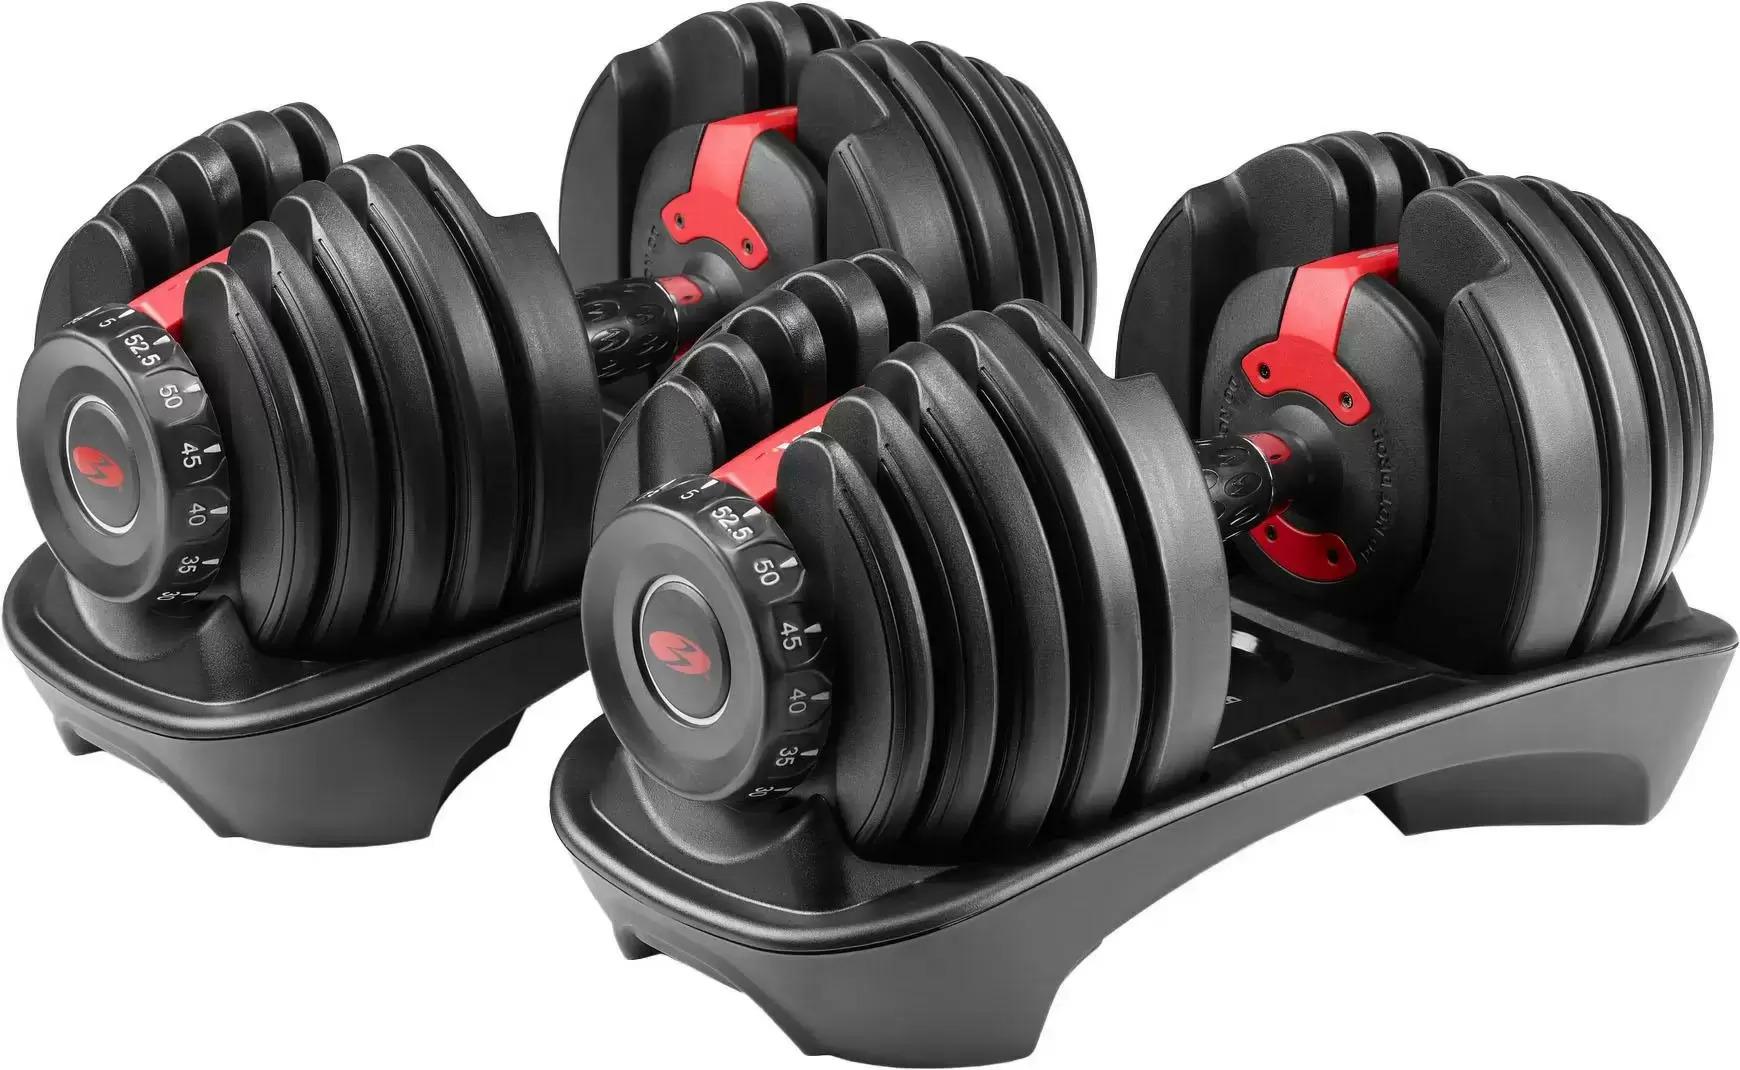 Bowflex SelectTech 552 Two Adjustable Dumbbells for $299.99 Shipped